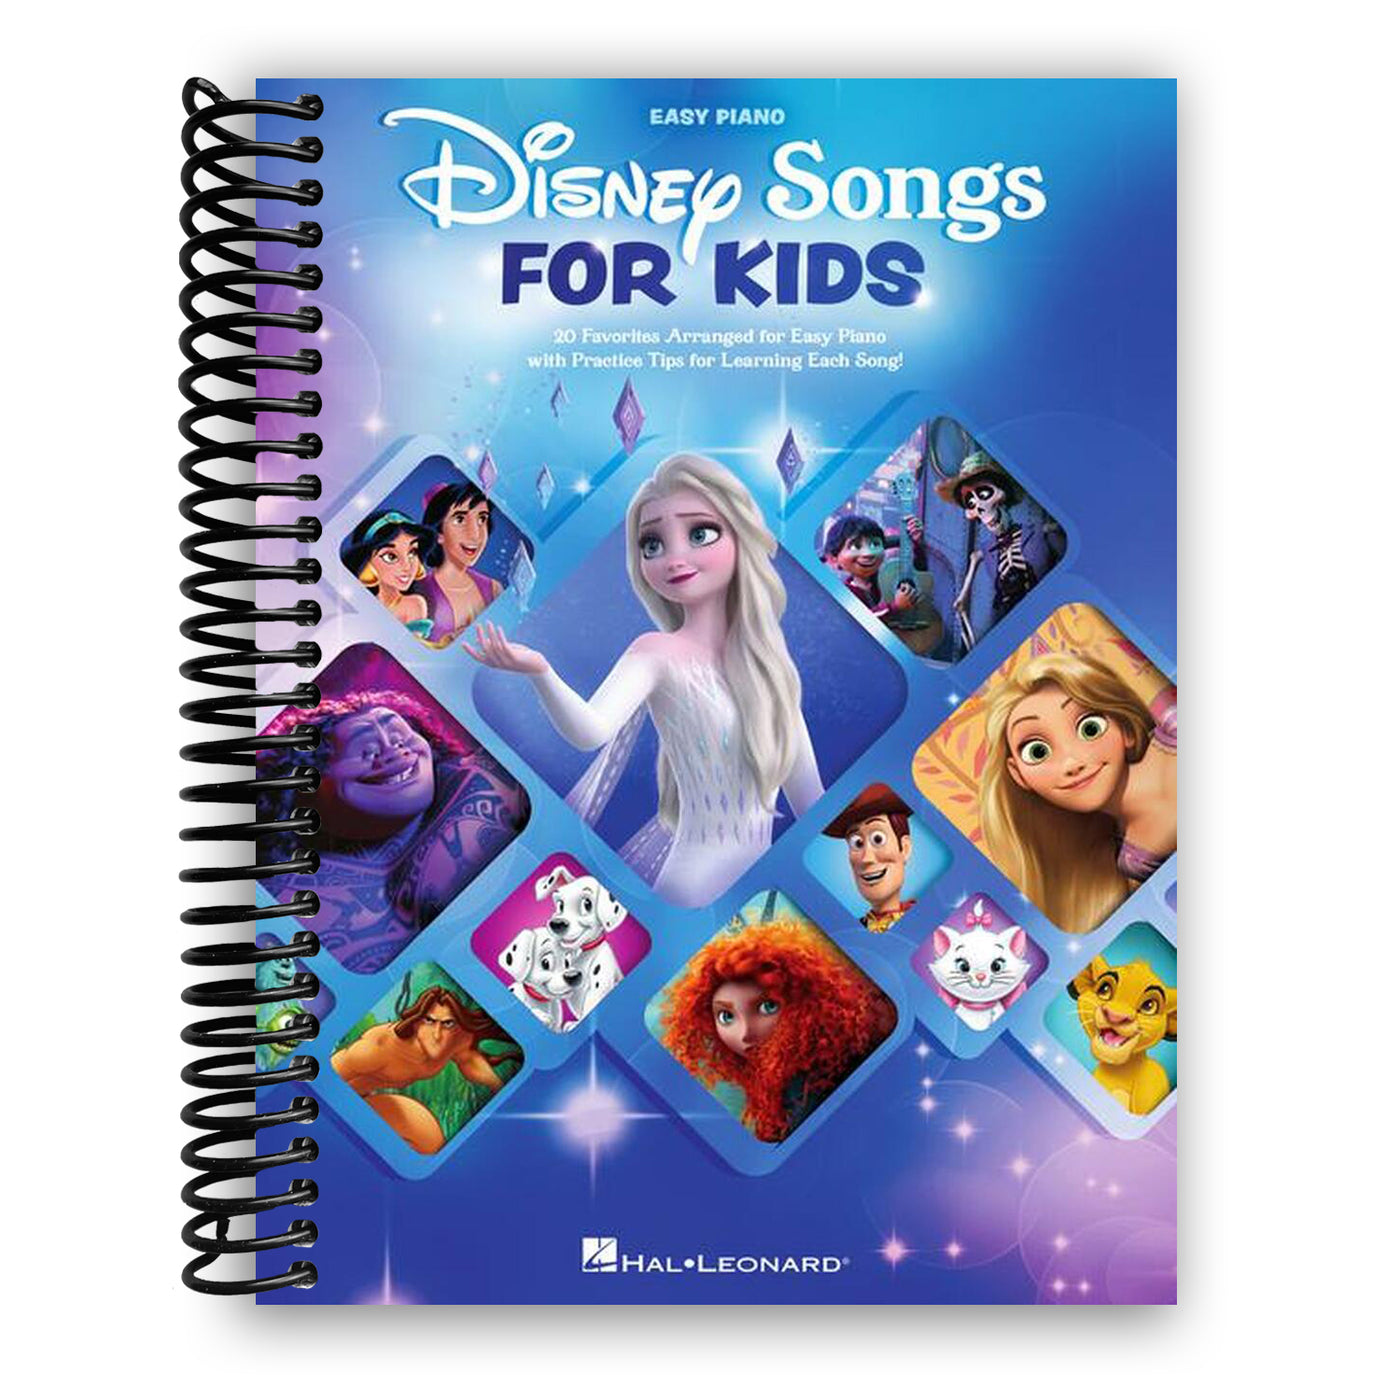 Disney Songs for Kids - Easy Piano Songbook (Spiral Bound)